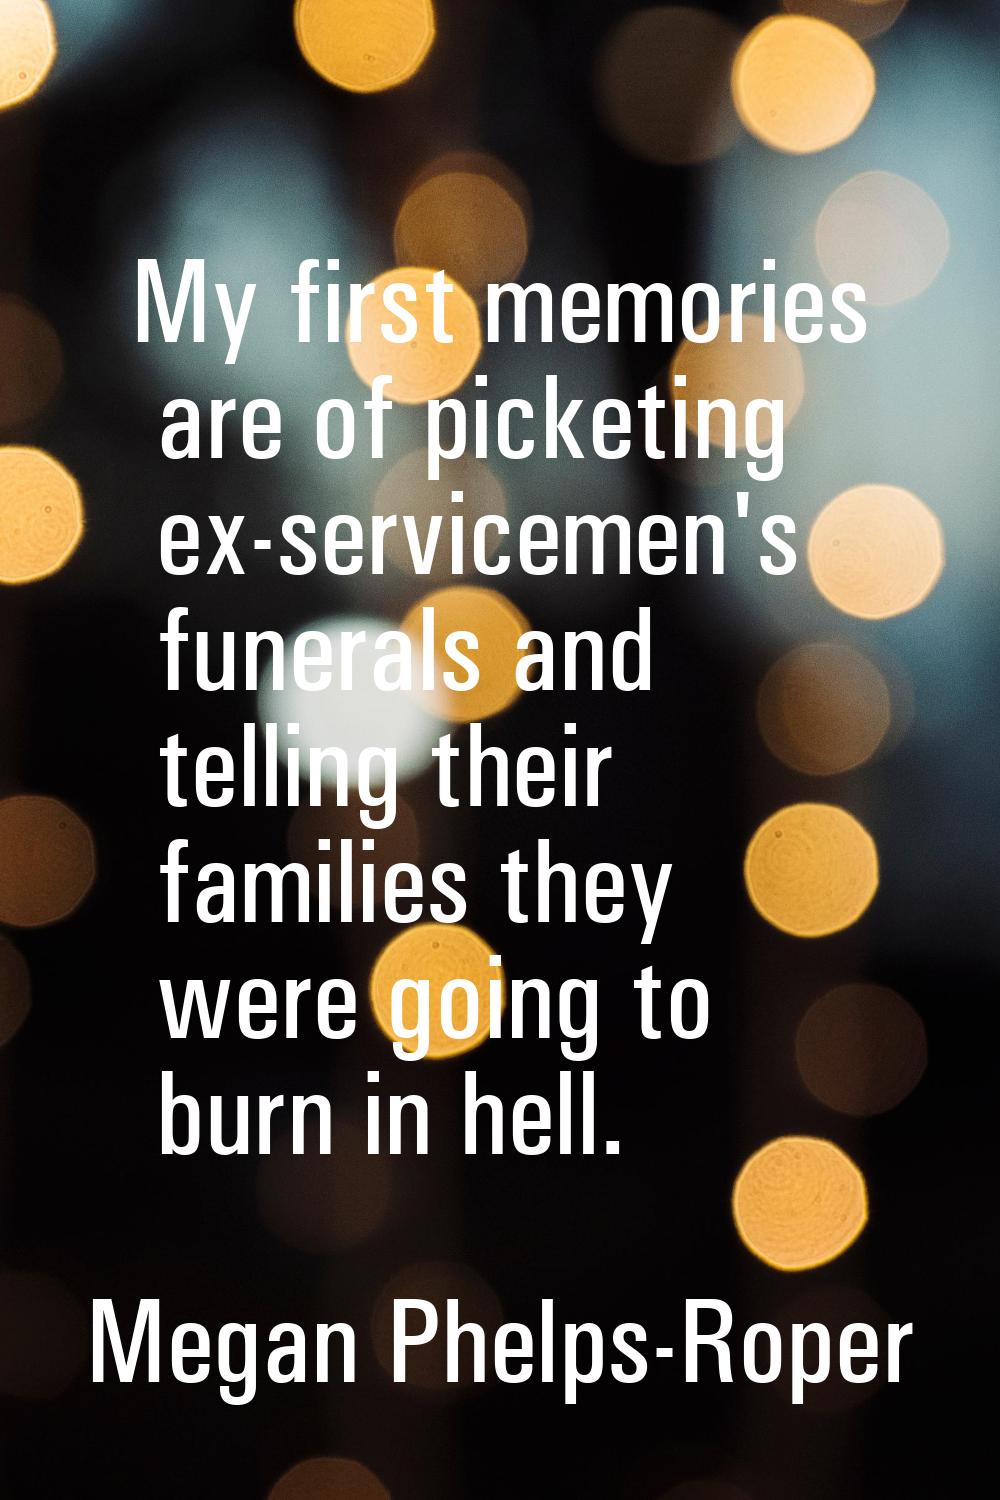 My first memories are of picketing ex-servicemen's funerals and telling their families they were go